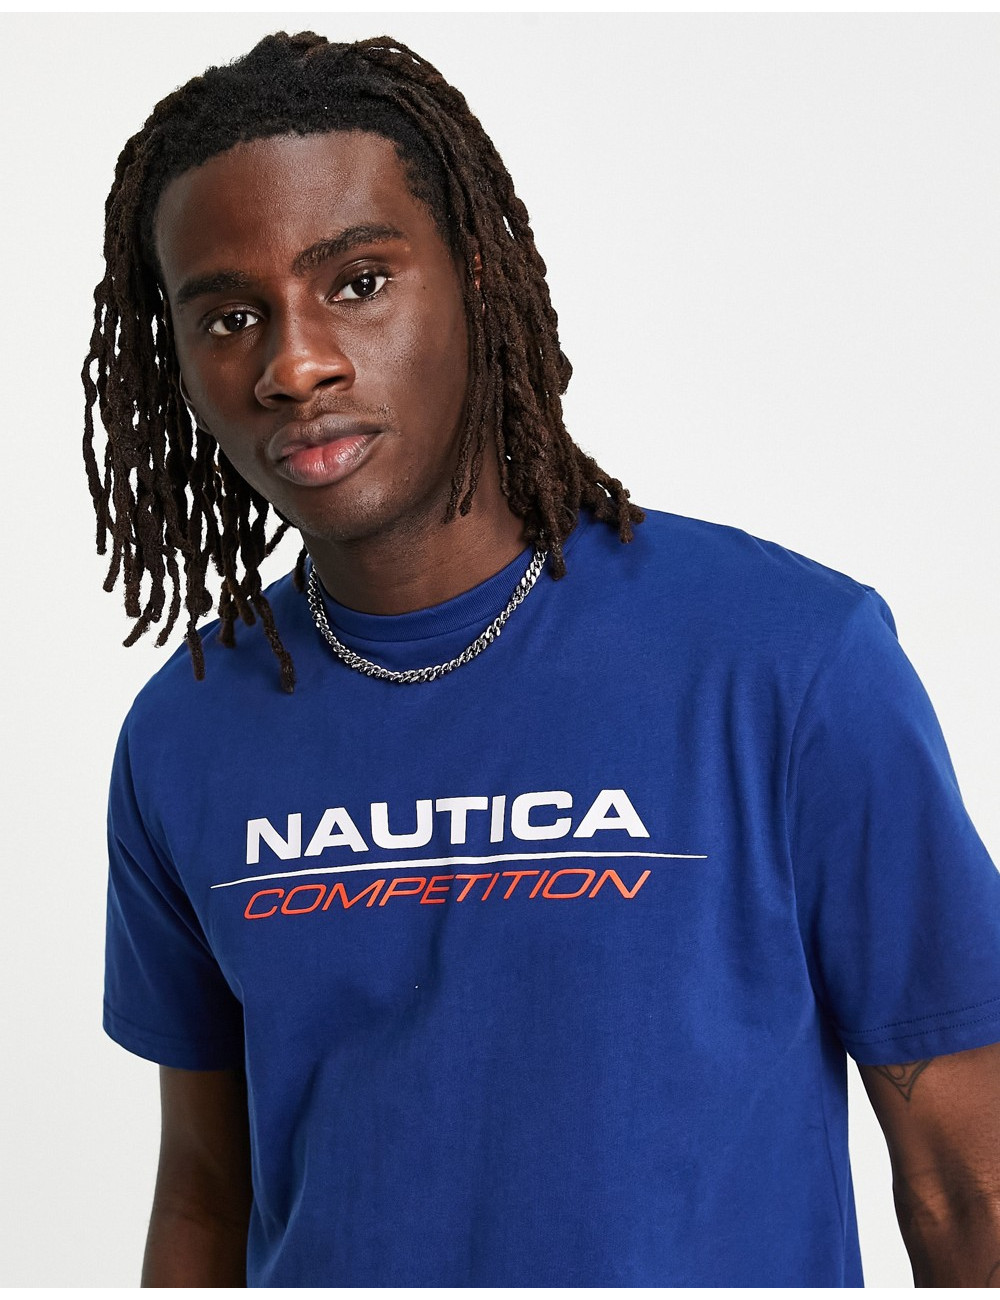 Nautica Competition vang...